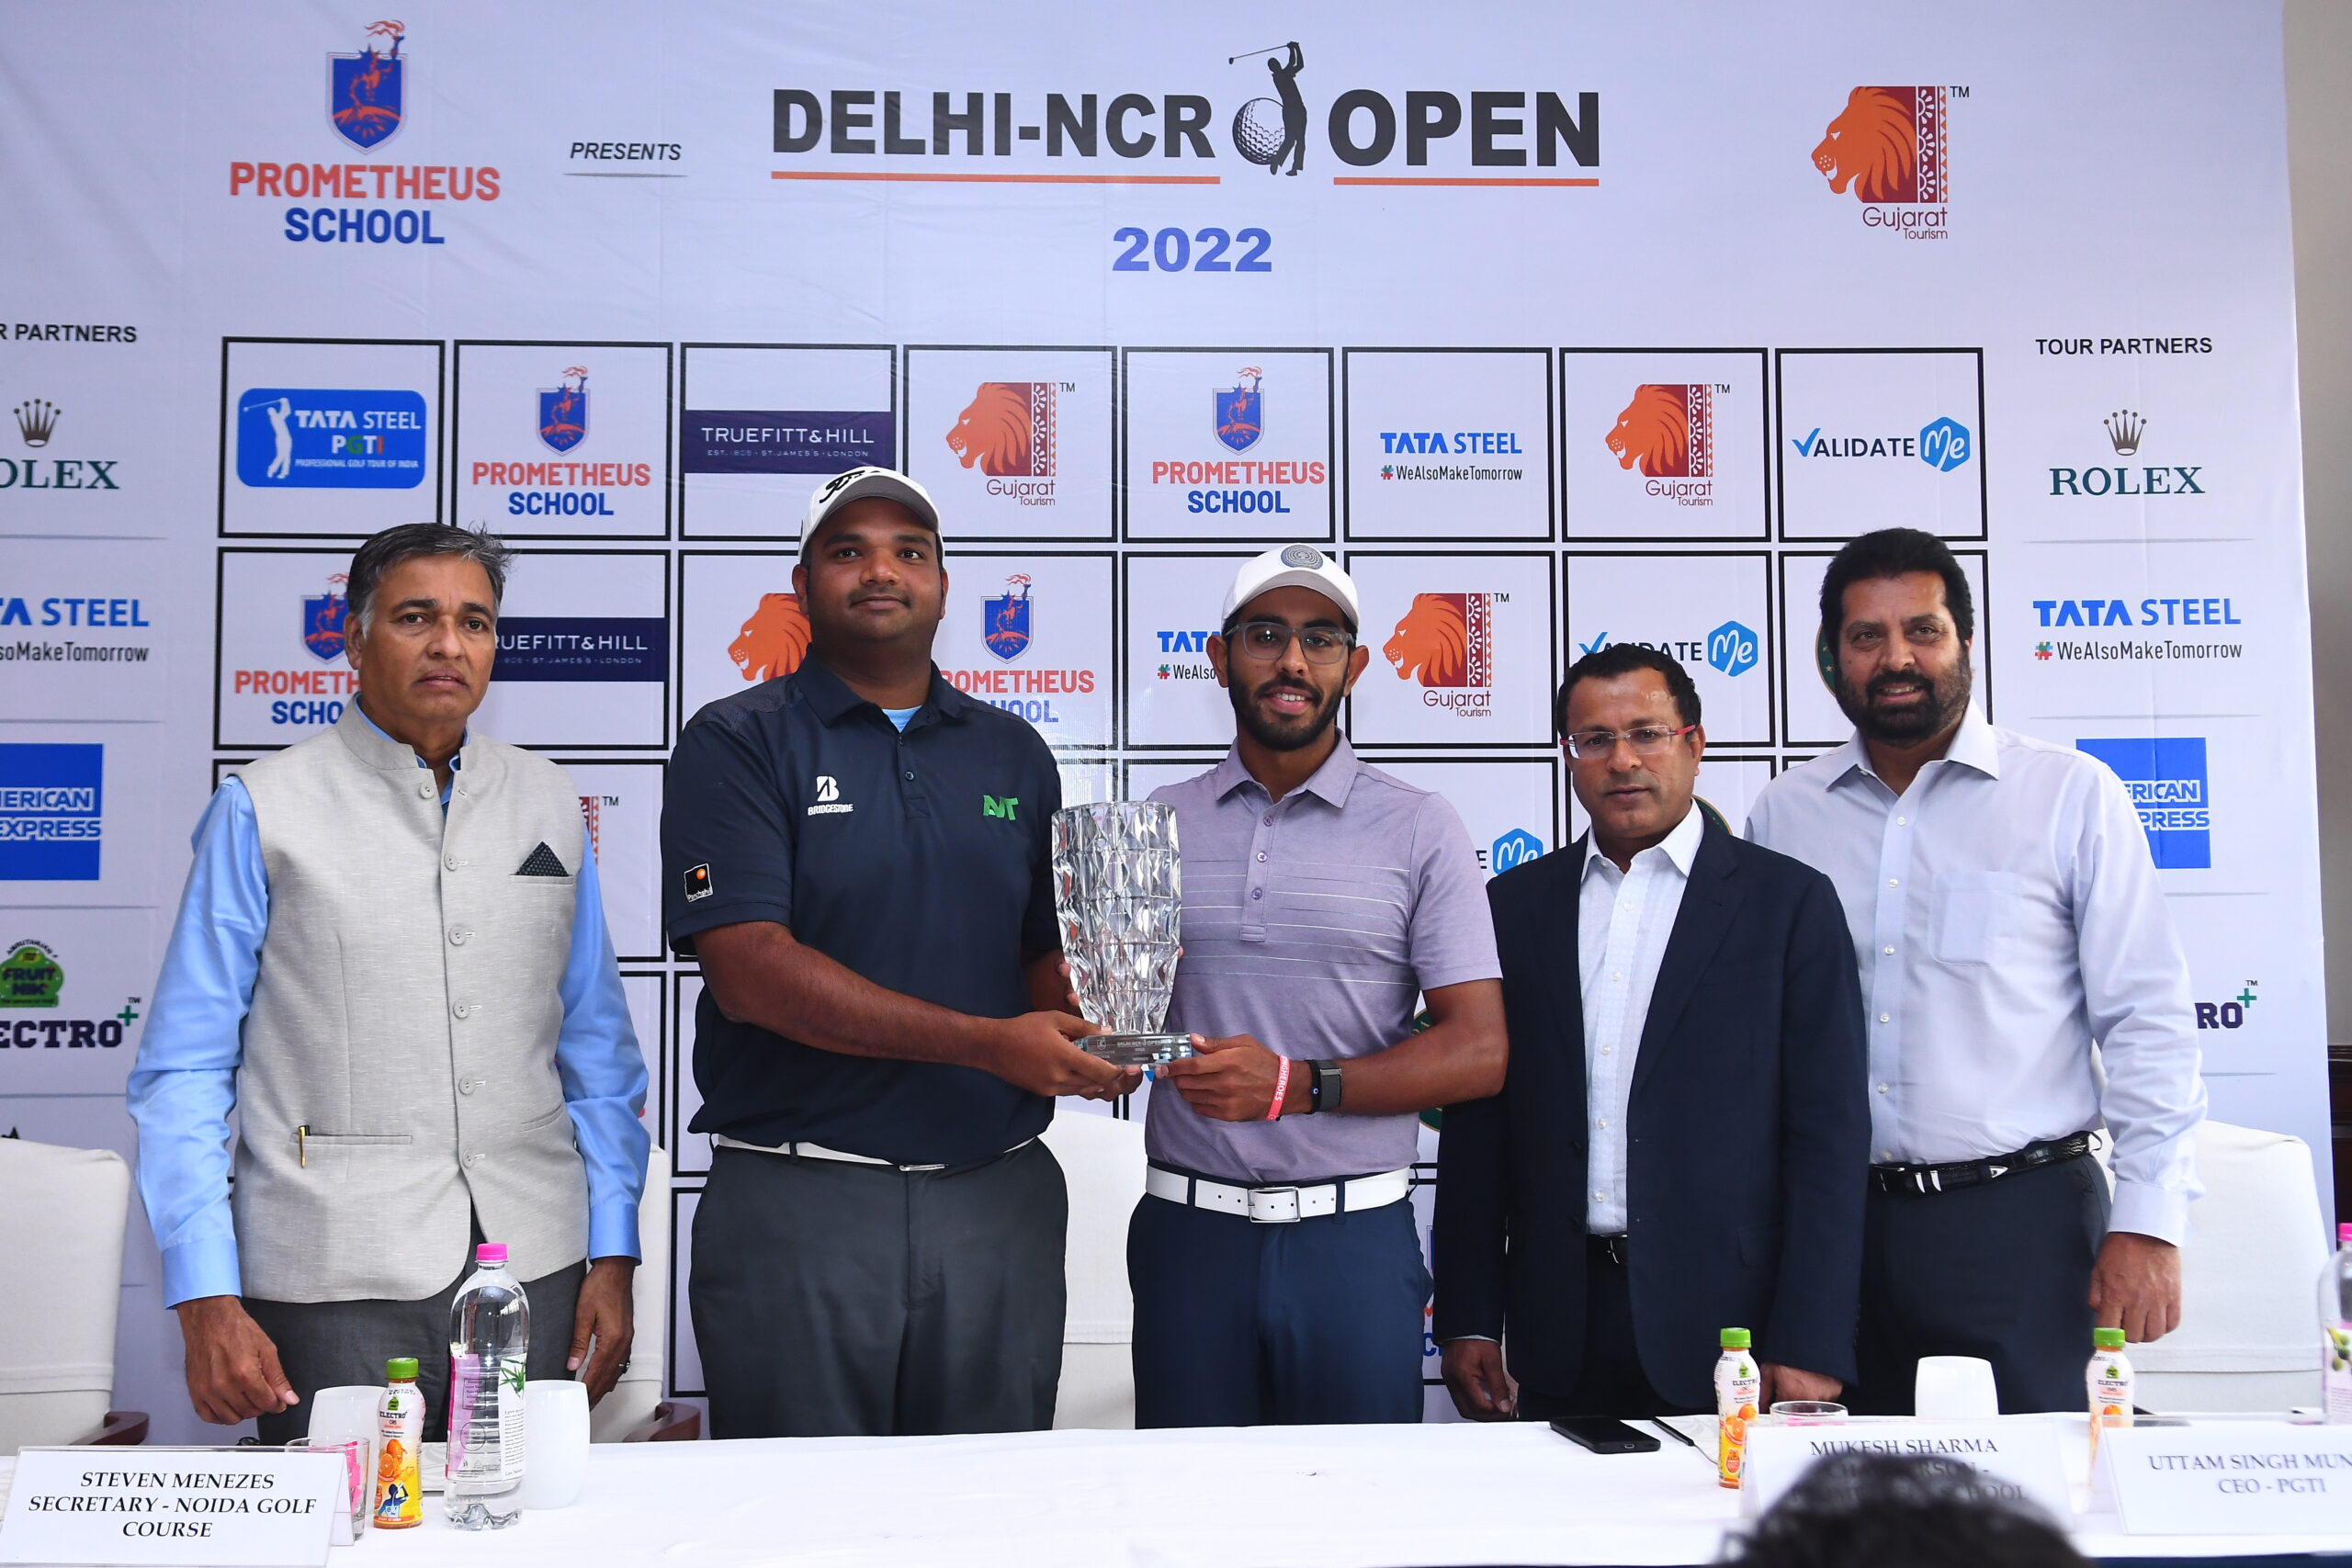  Delhi-NCR open Golf championship 2022 to tee off on April 19